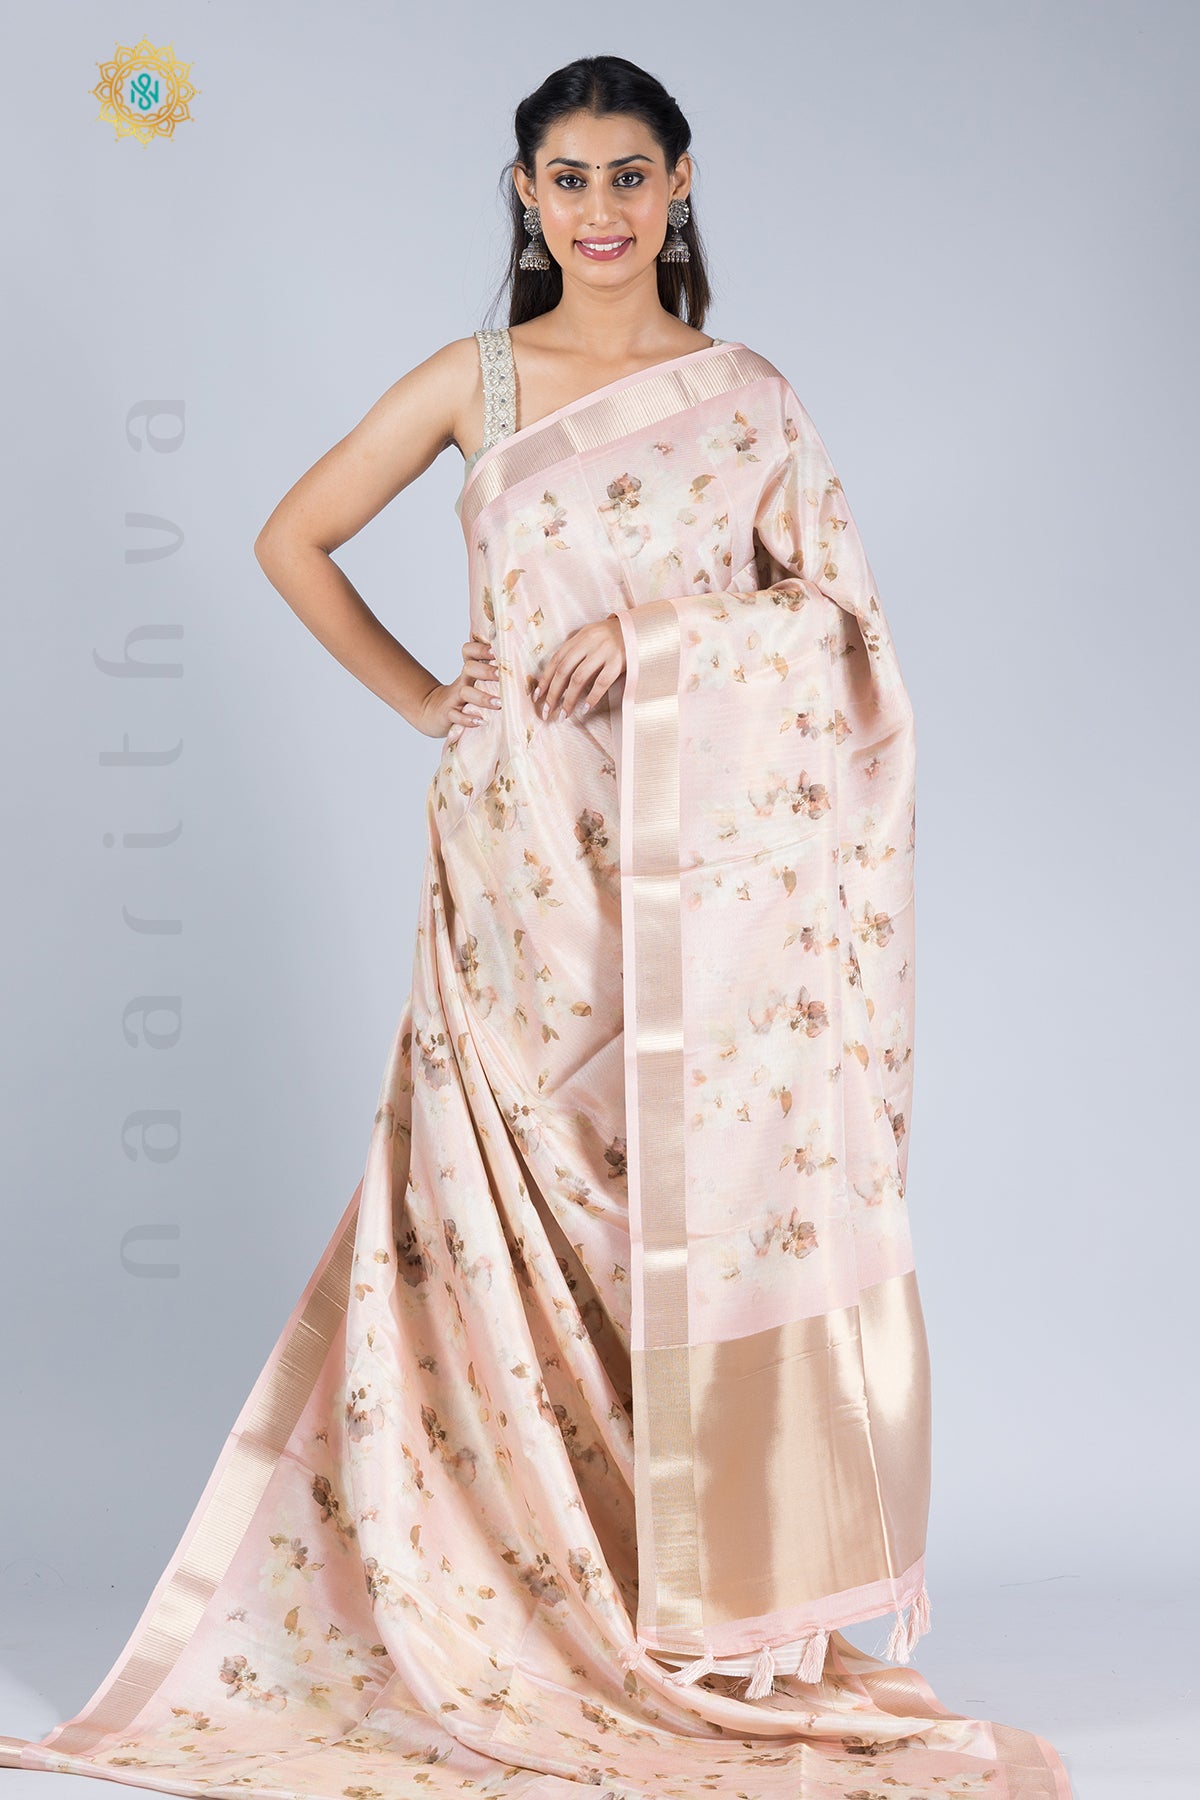 SOFT TISSUE WITH FLORAL DIGITAL PRINTS ON THE BODY & TISSUE PALLU